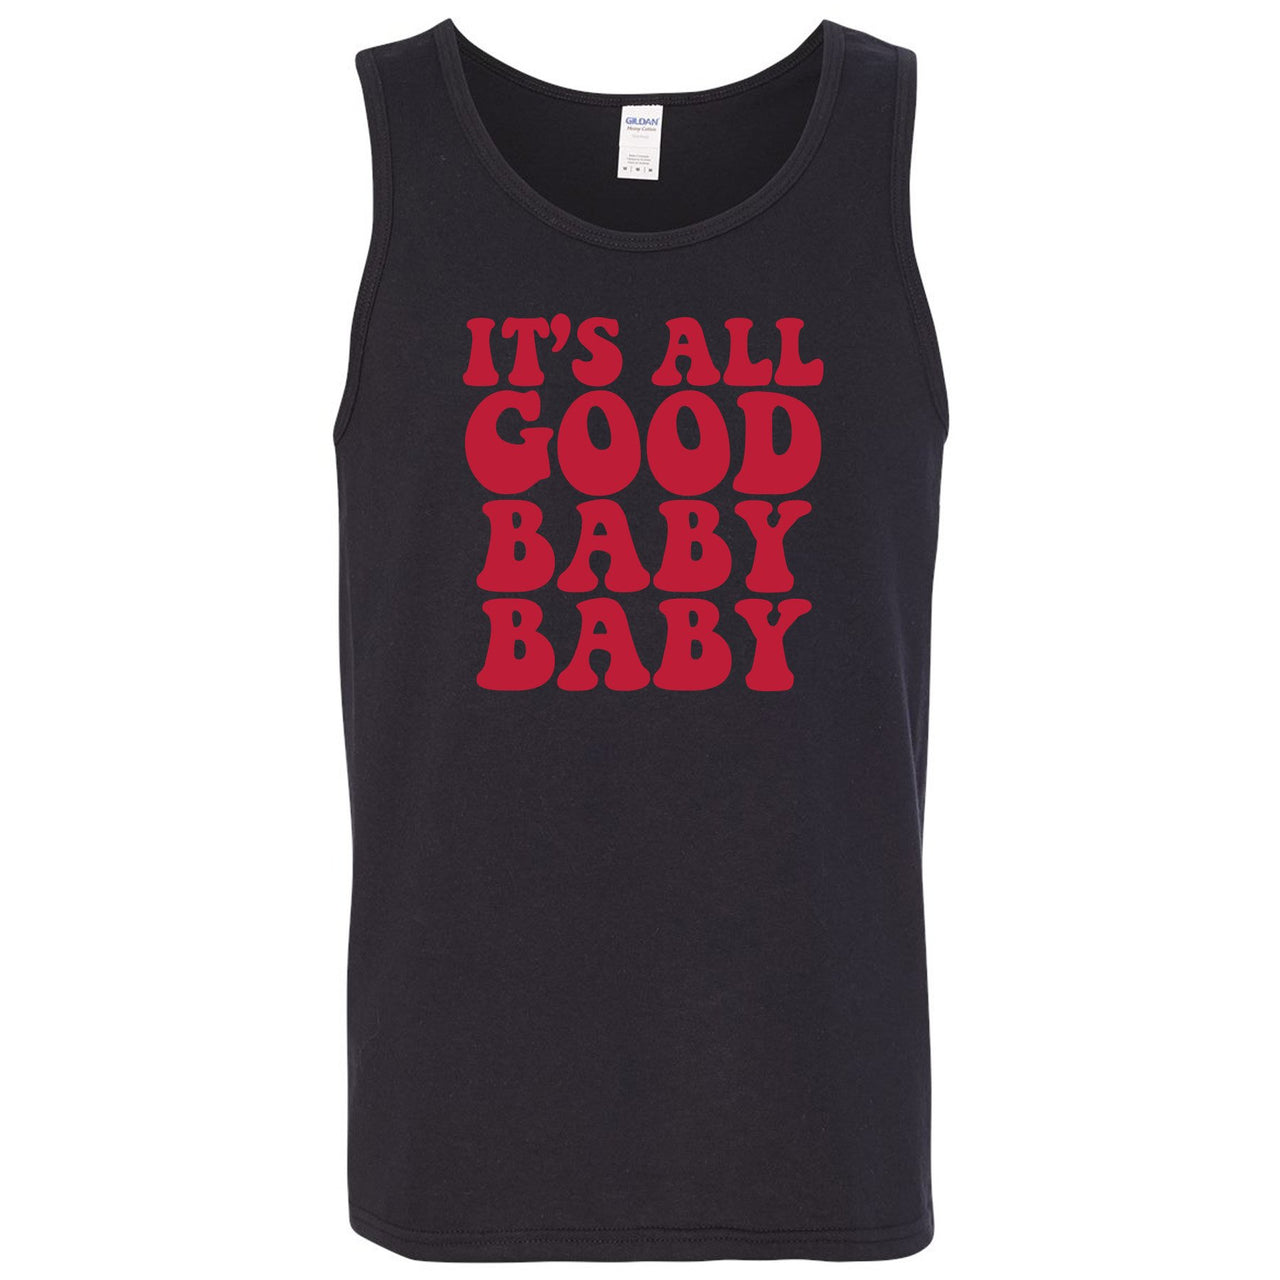 Reflections of a Champion 8s Mens Tank Top | It's All Good Baby Baby, Black